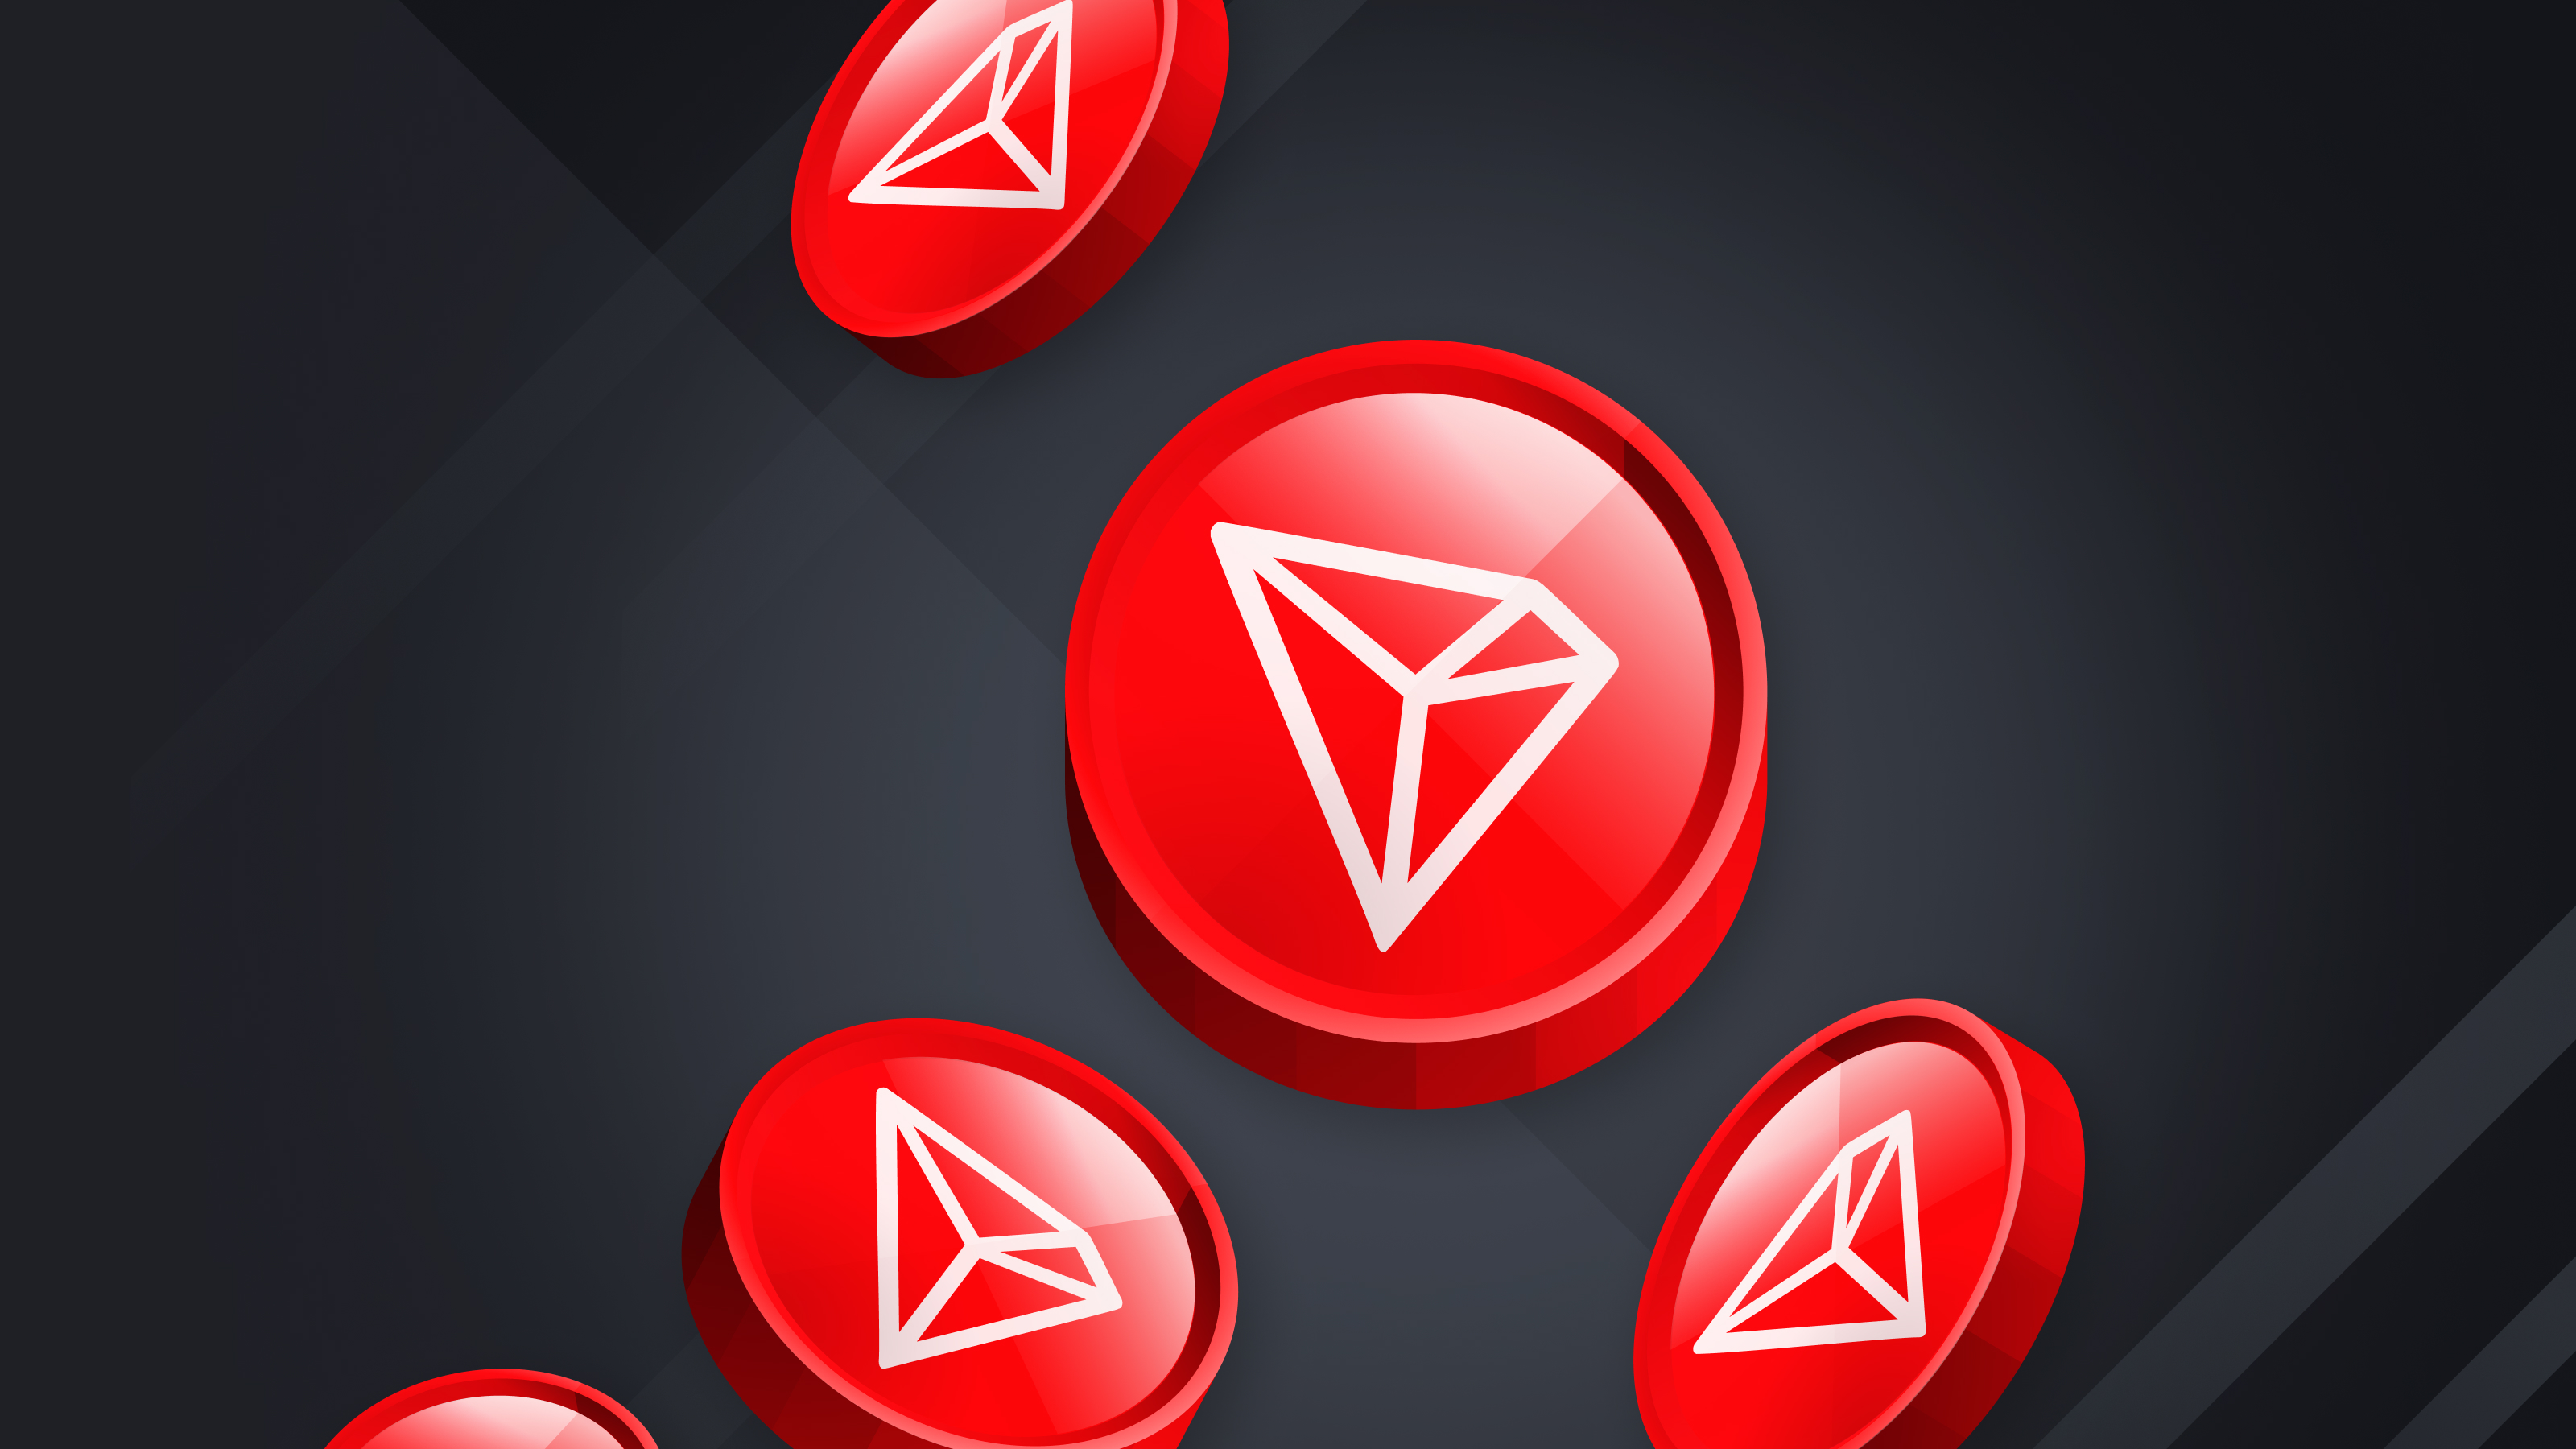 All About Tron (TRX)